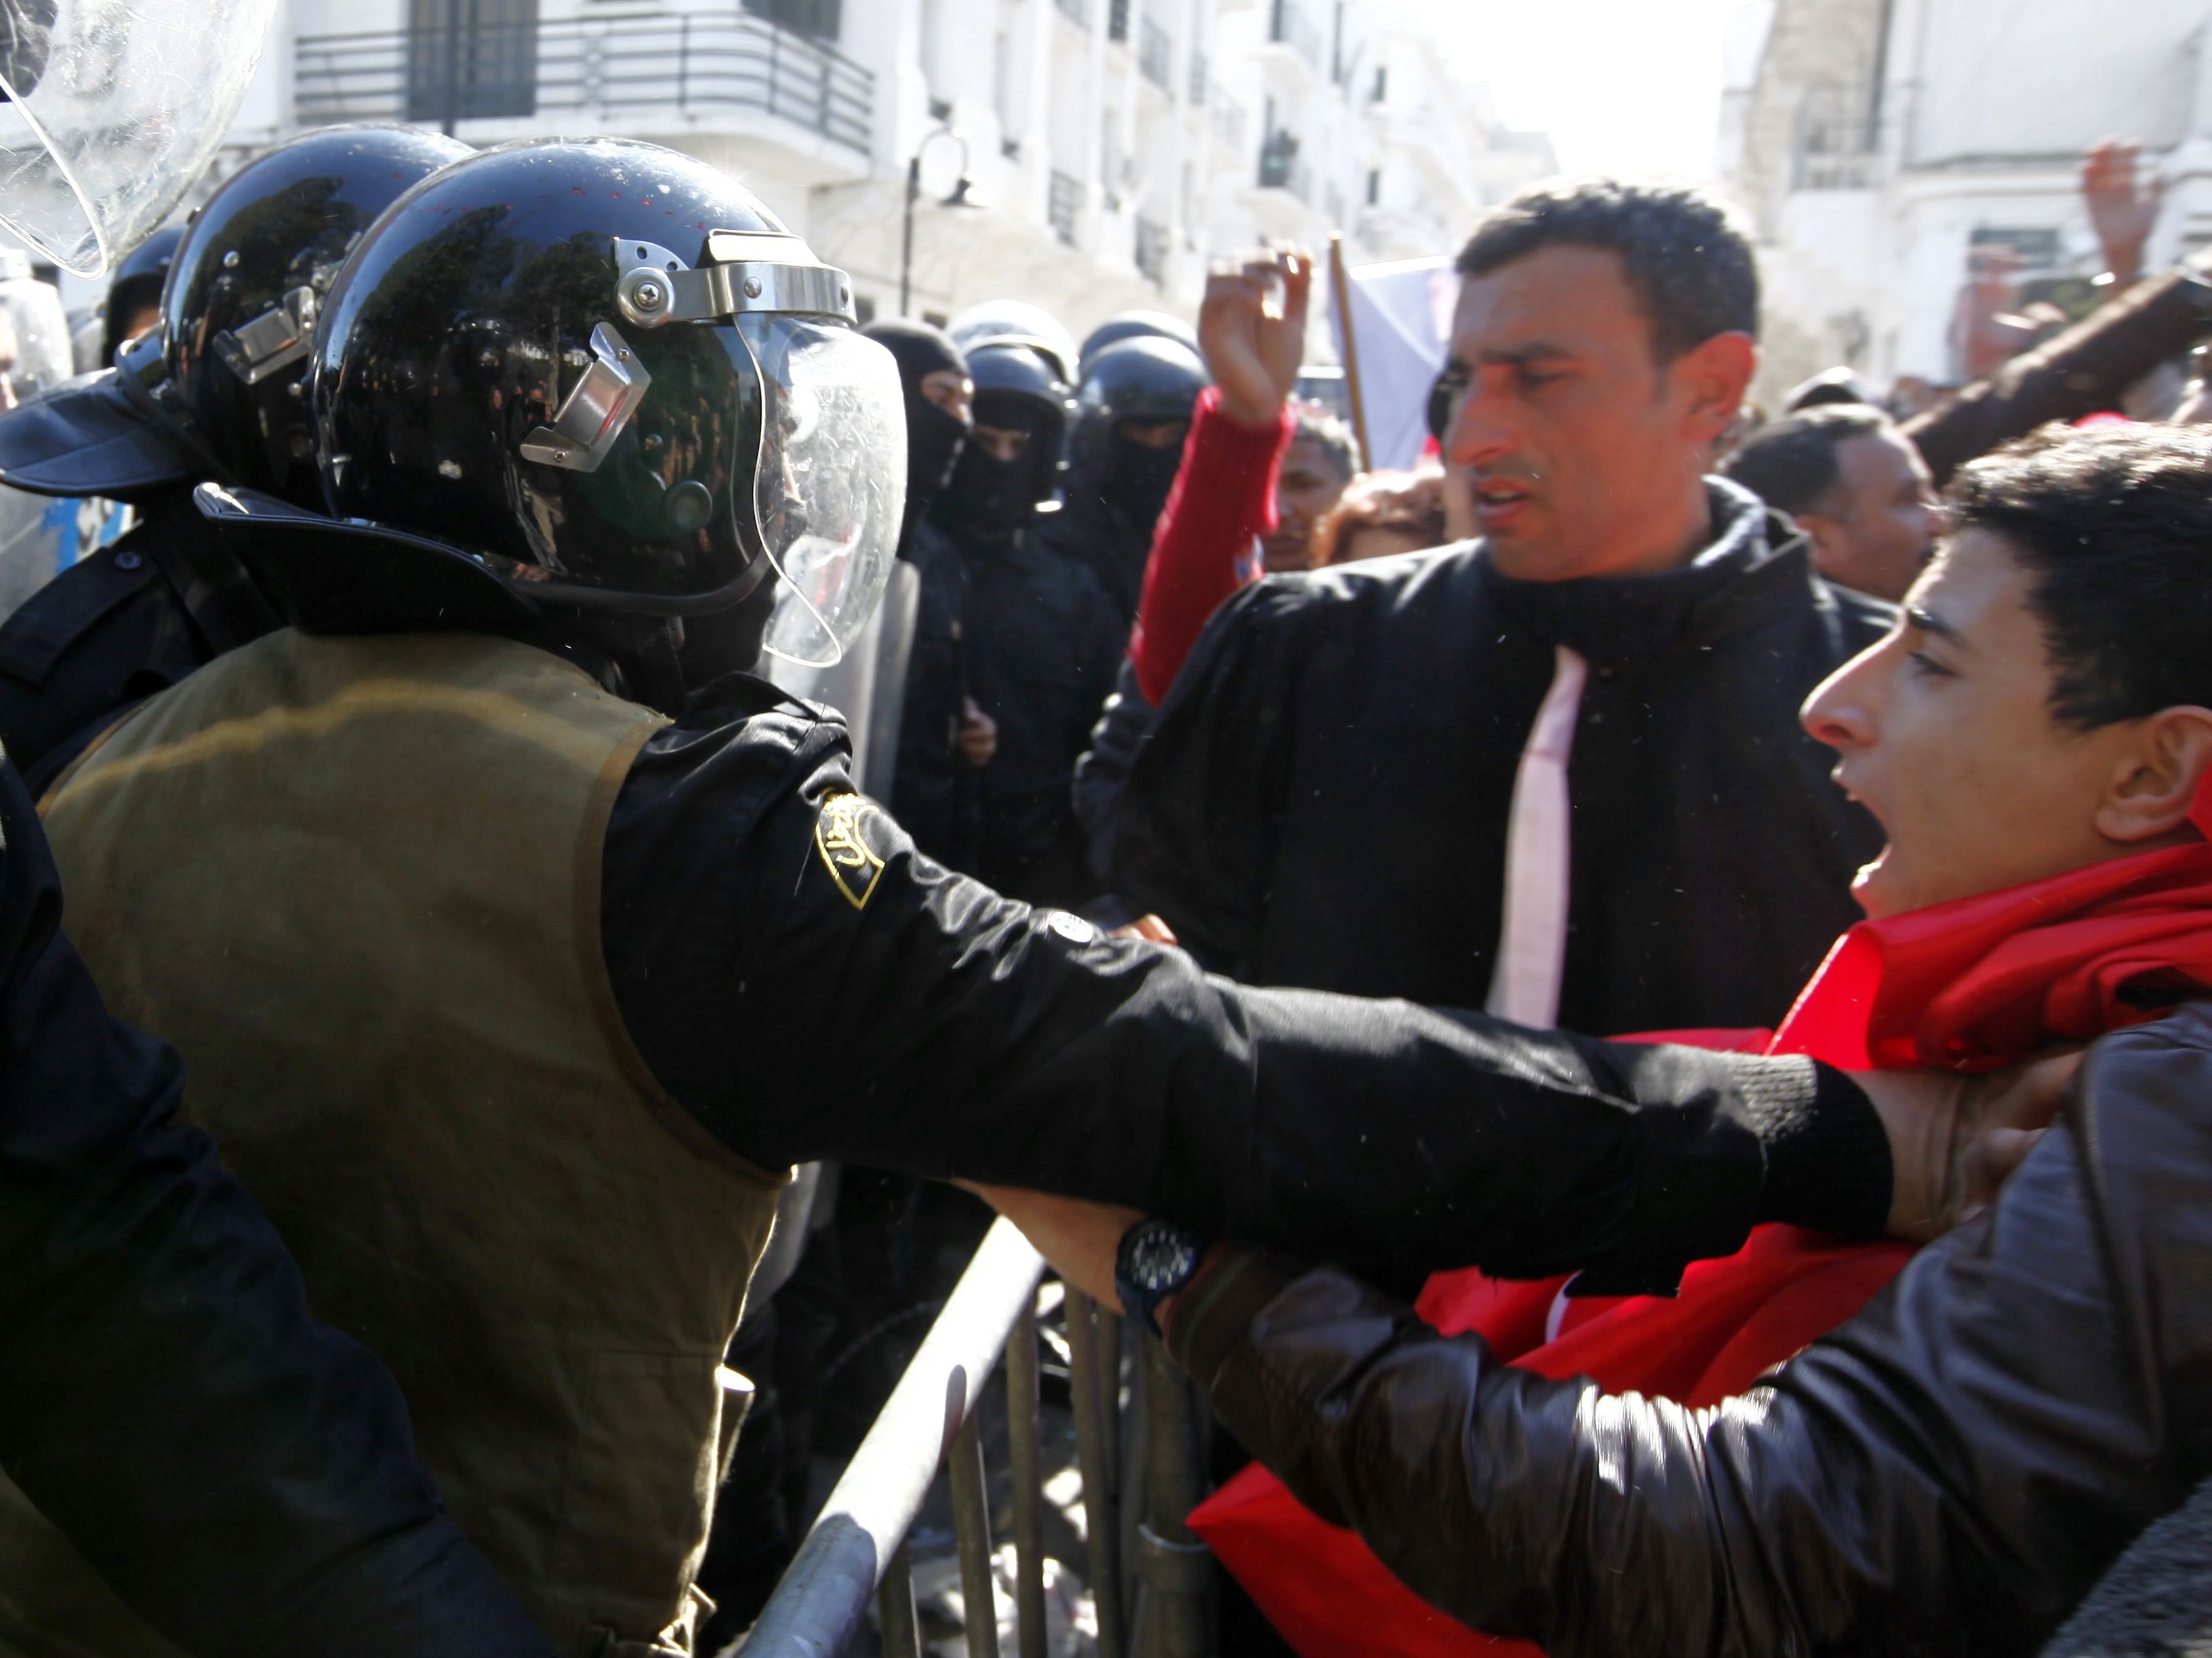 Tunisian protesters clash with riot police during a demonstration after the death of Tunisian opposition leader Chokri Belaid, outside the Interior ministry in Tunis on 6 February 2013